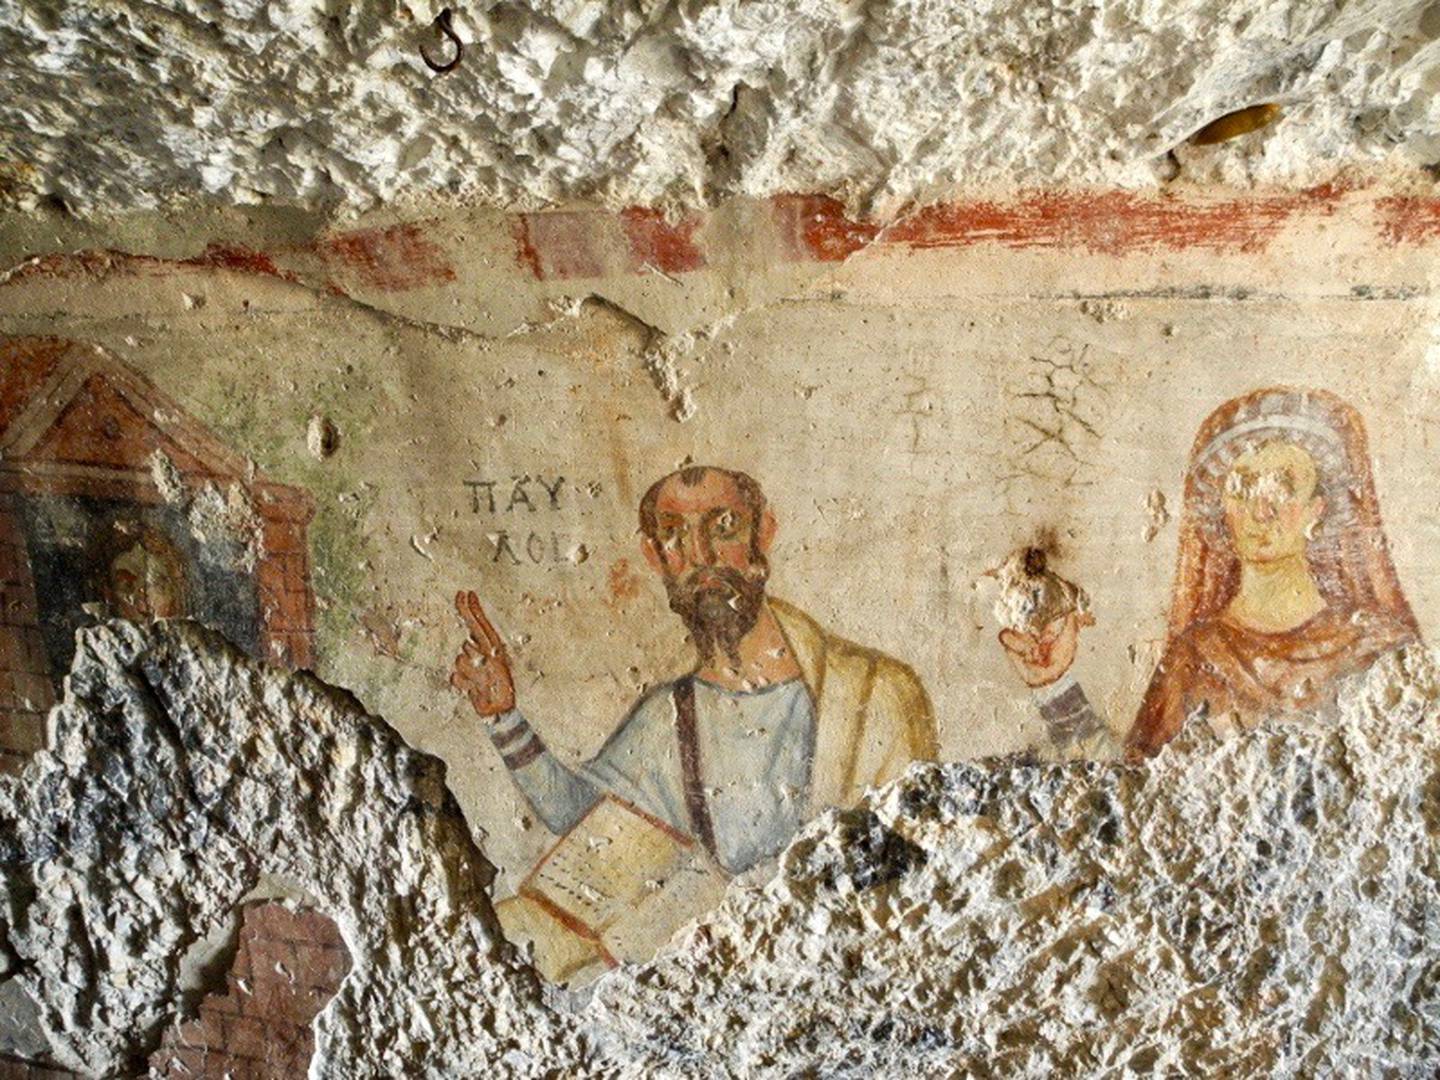 A 5th-6th c. CE fresco in the Ephesus Paul and Thecla grotto: Thekla appears at a window, listening to Paul as he preaches with his raised right hand on an open codex. Theokleia, Thekla’s mother, stands with her right hand raised in admonition.